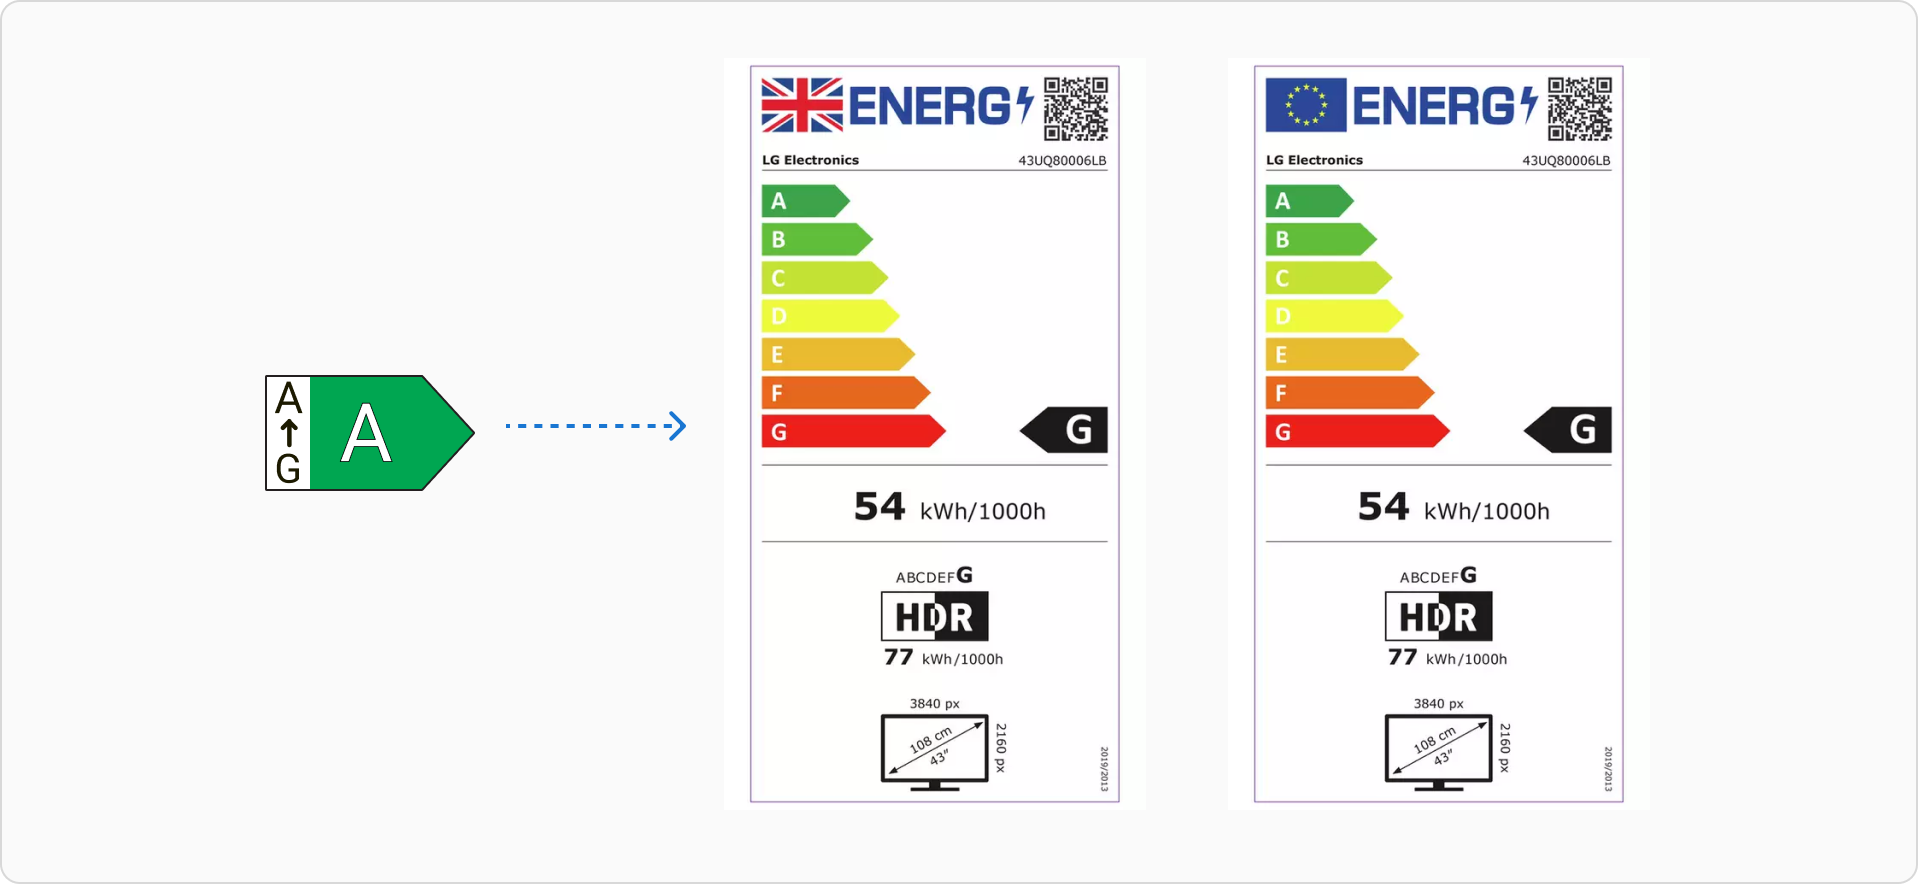 Example of Energy Label linking to Product Information Sheet